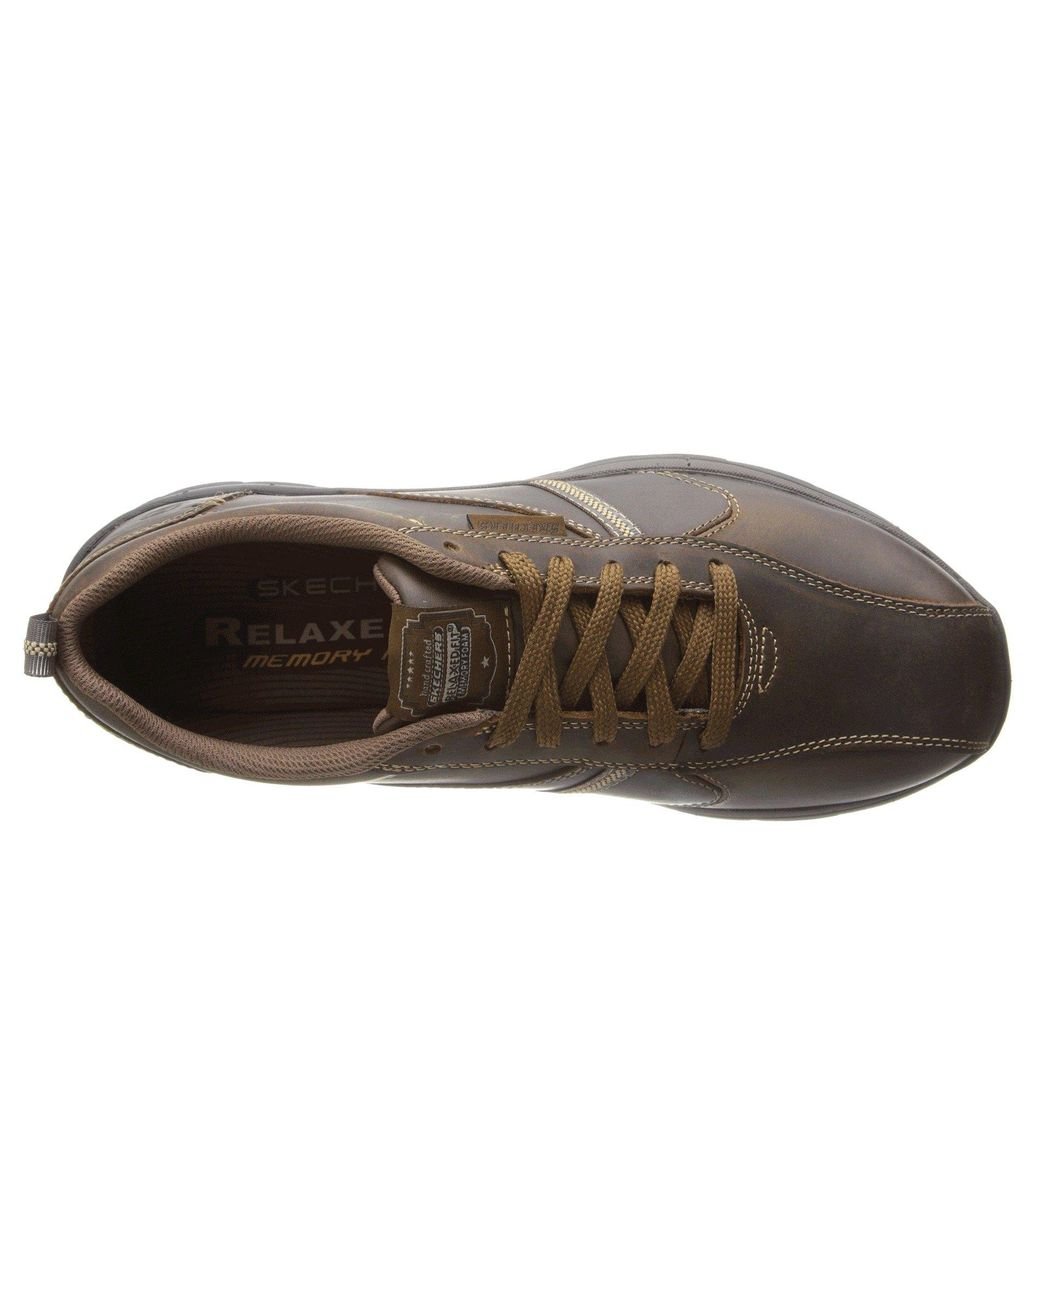 skechers relaxed fit levoy shoes